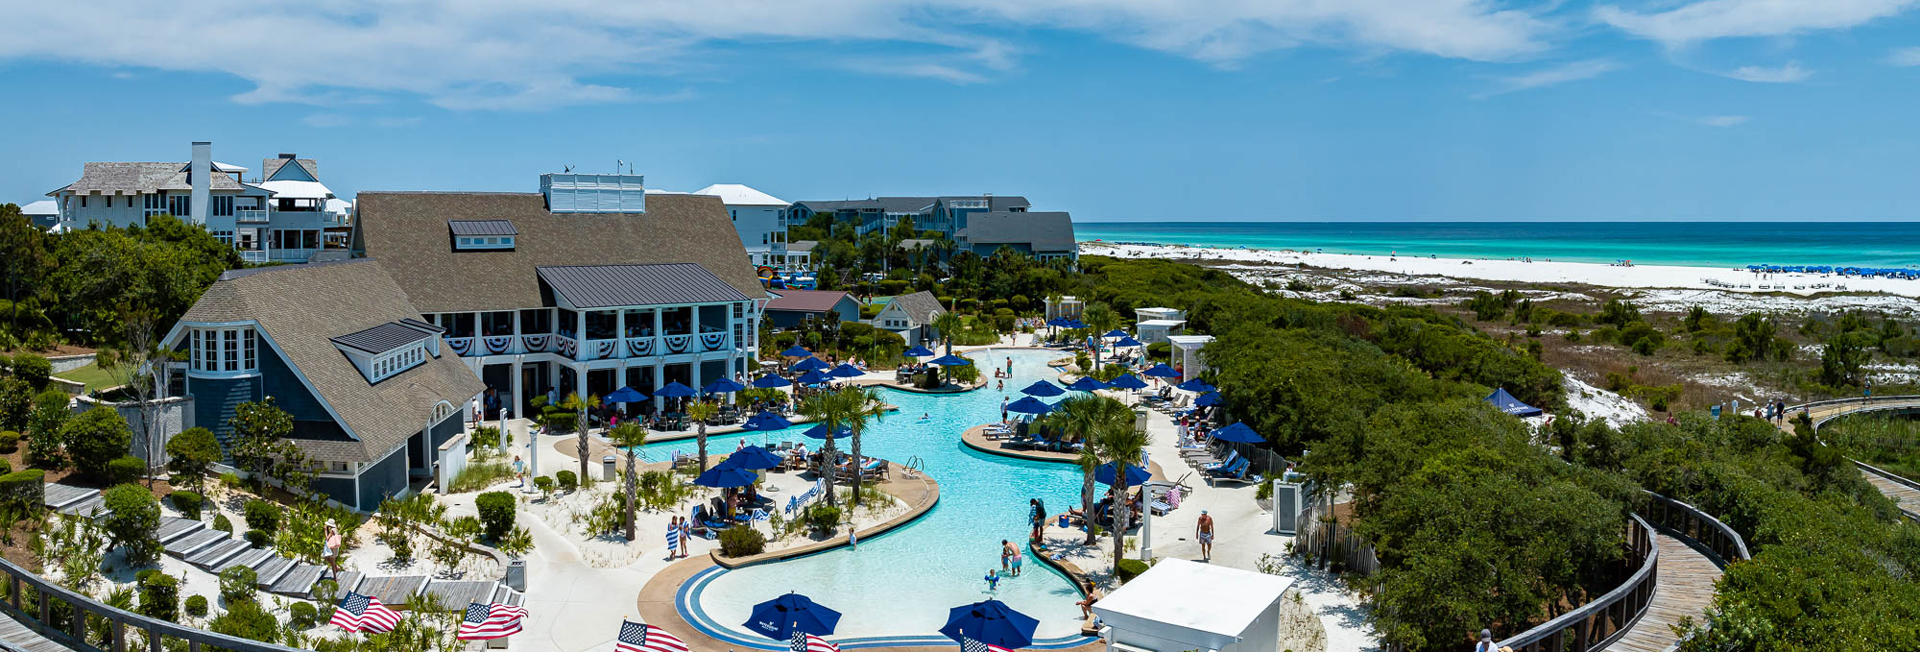 The Watersound Club private beach club located on scenic Highway 30A in South Walton, FL